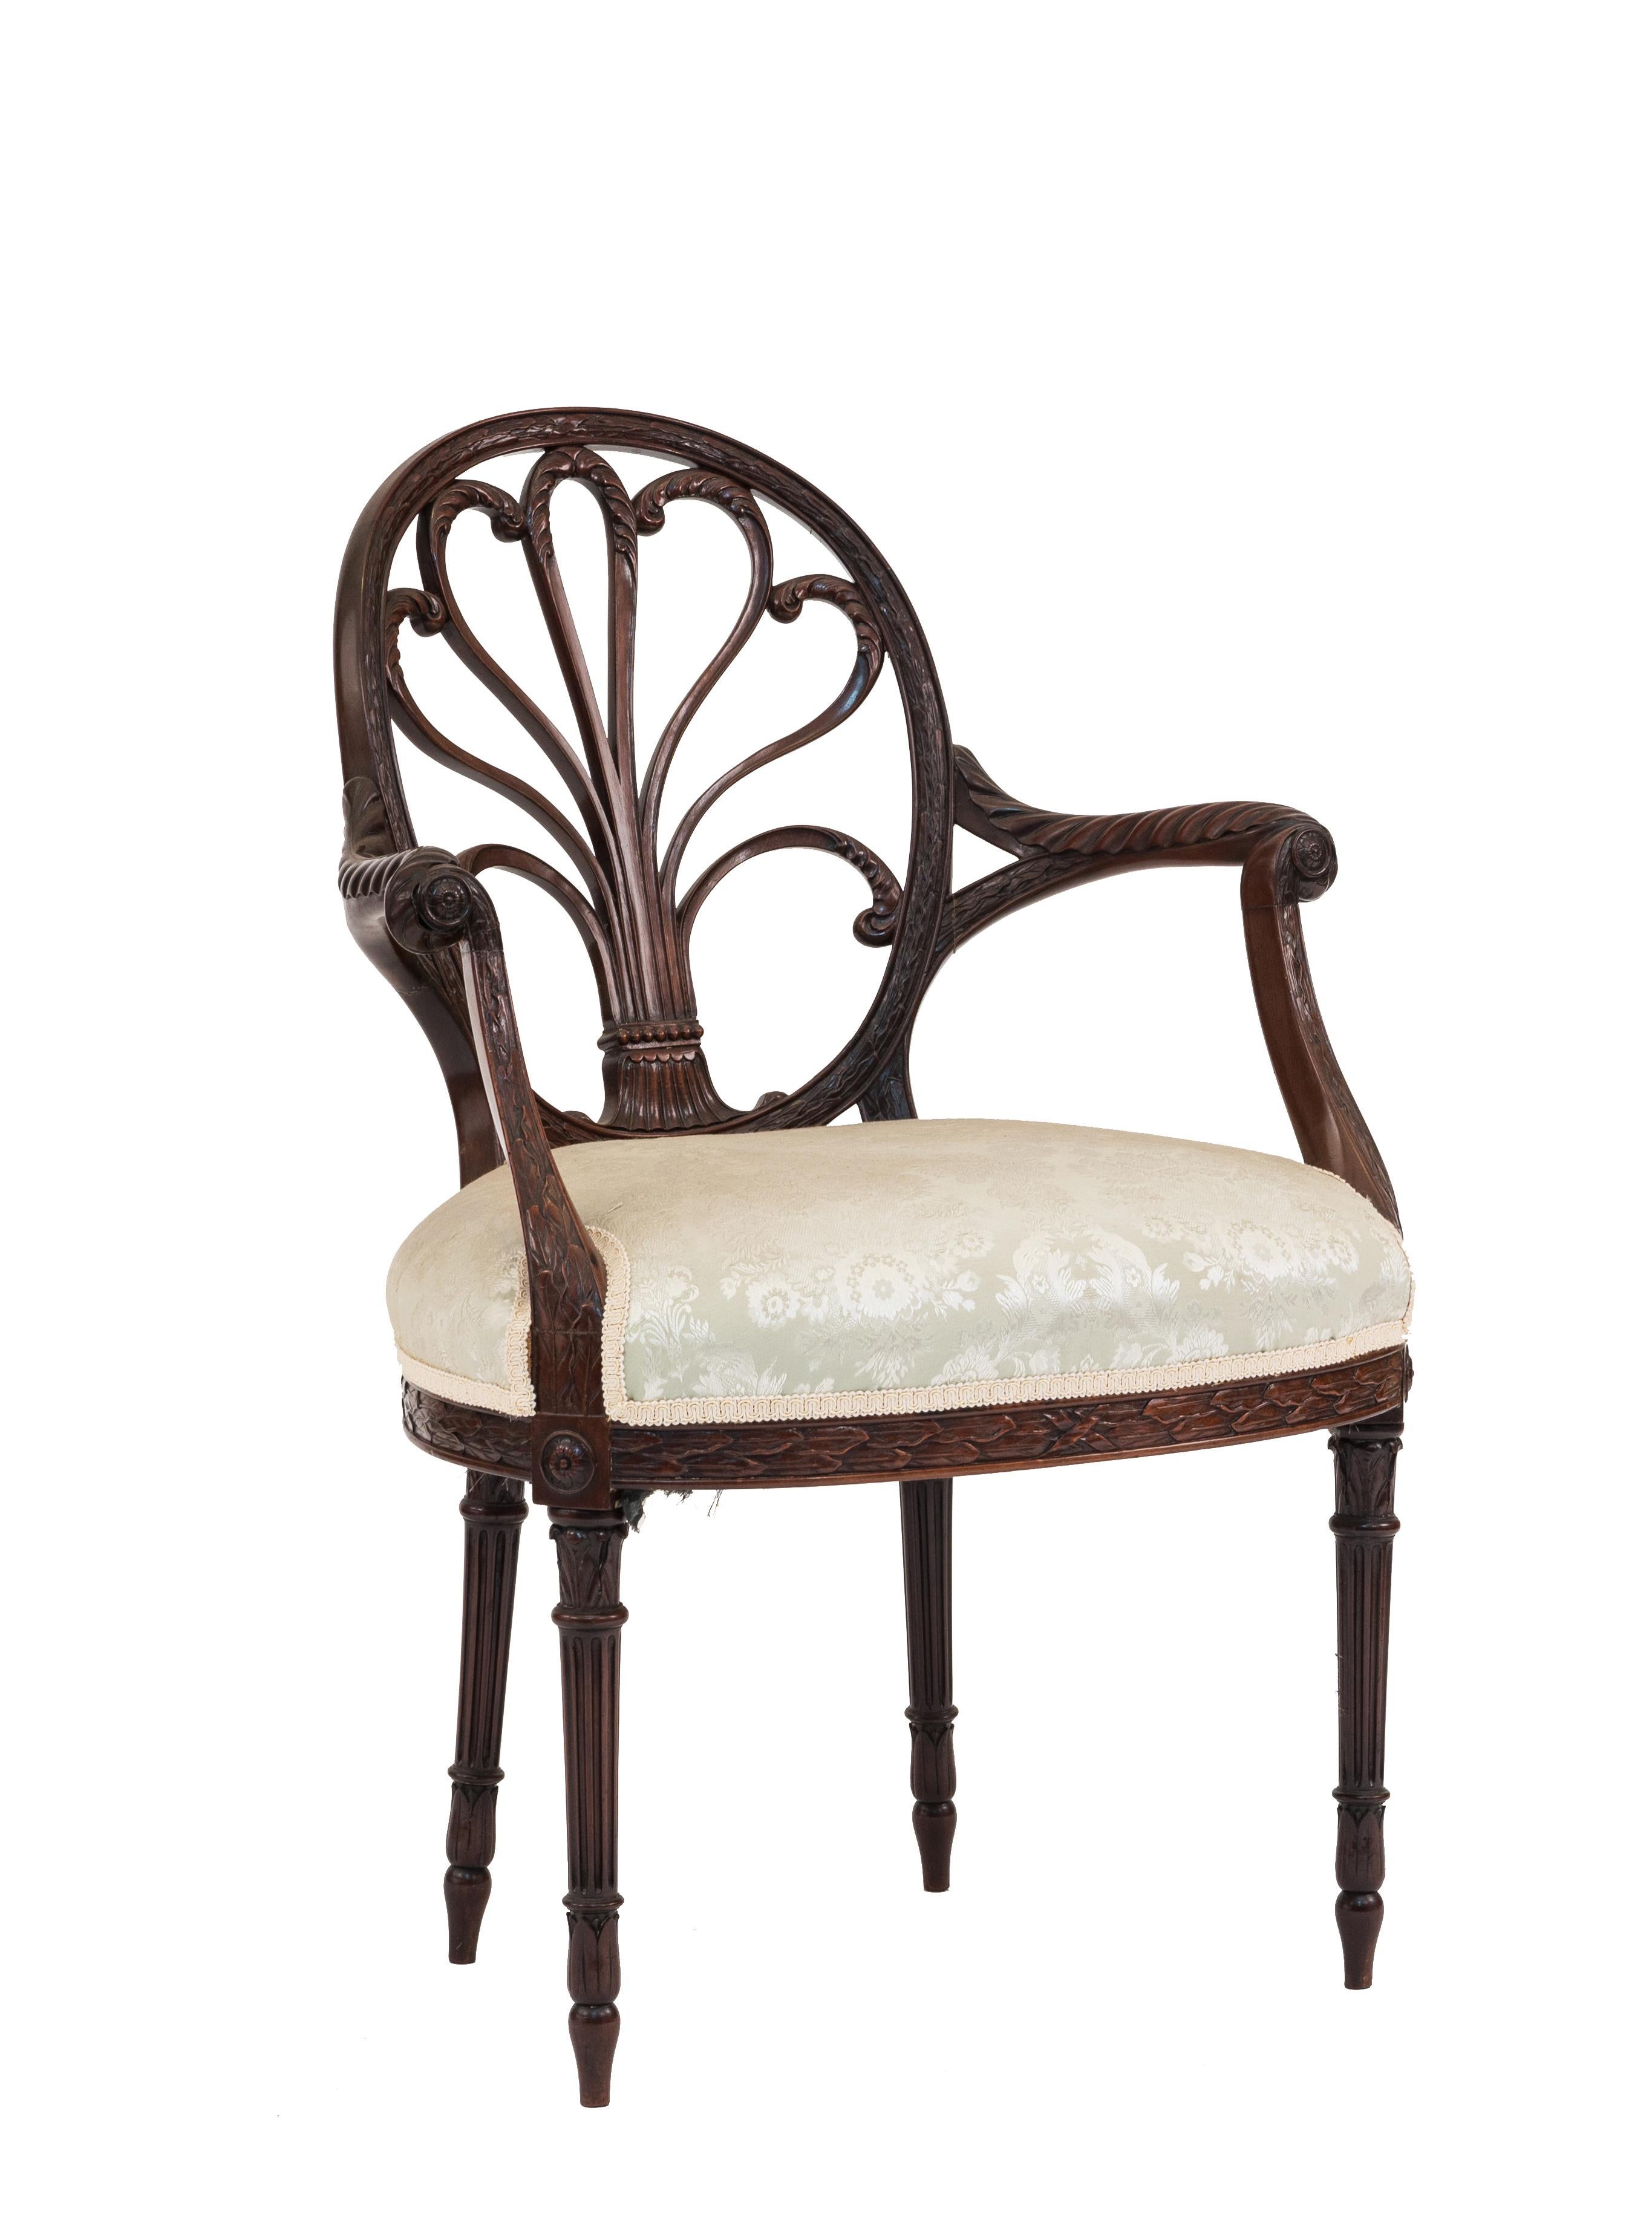 Pair of English Georgian style mahogany armchairs with carved palmette design back on fluted legs with upholstered seat (19th century.)